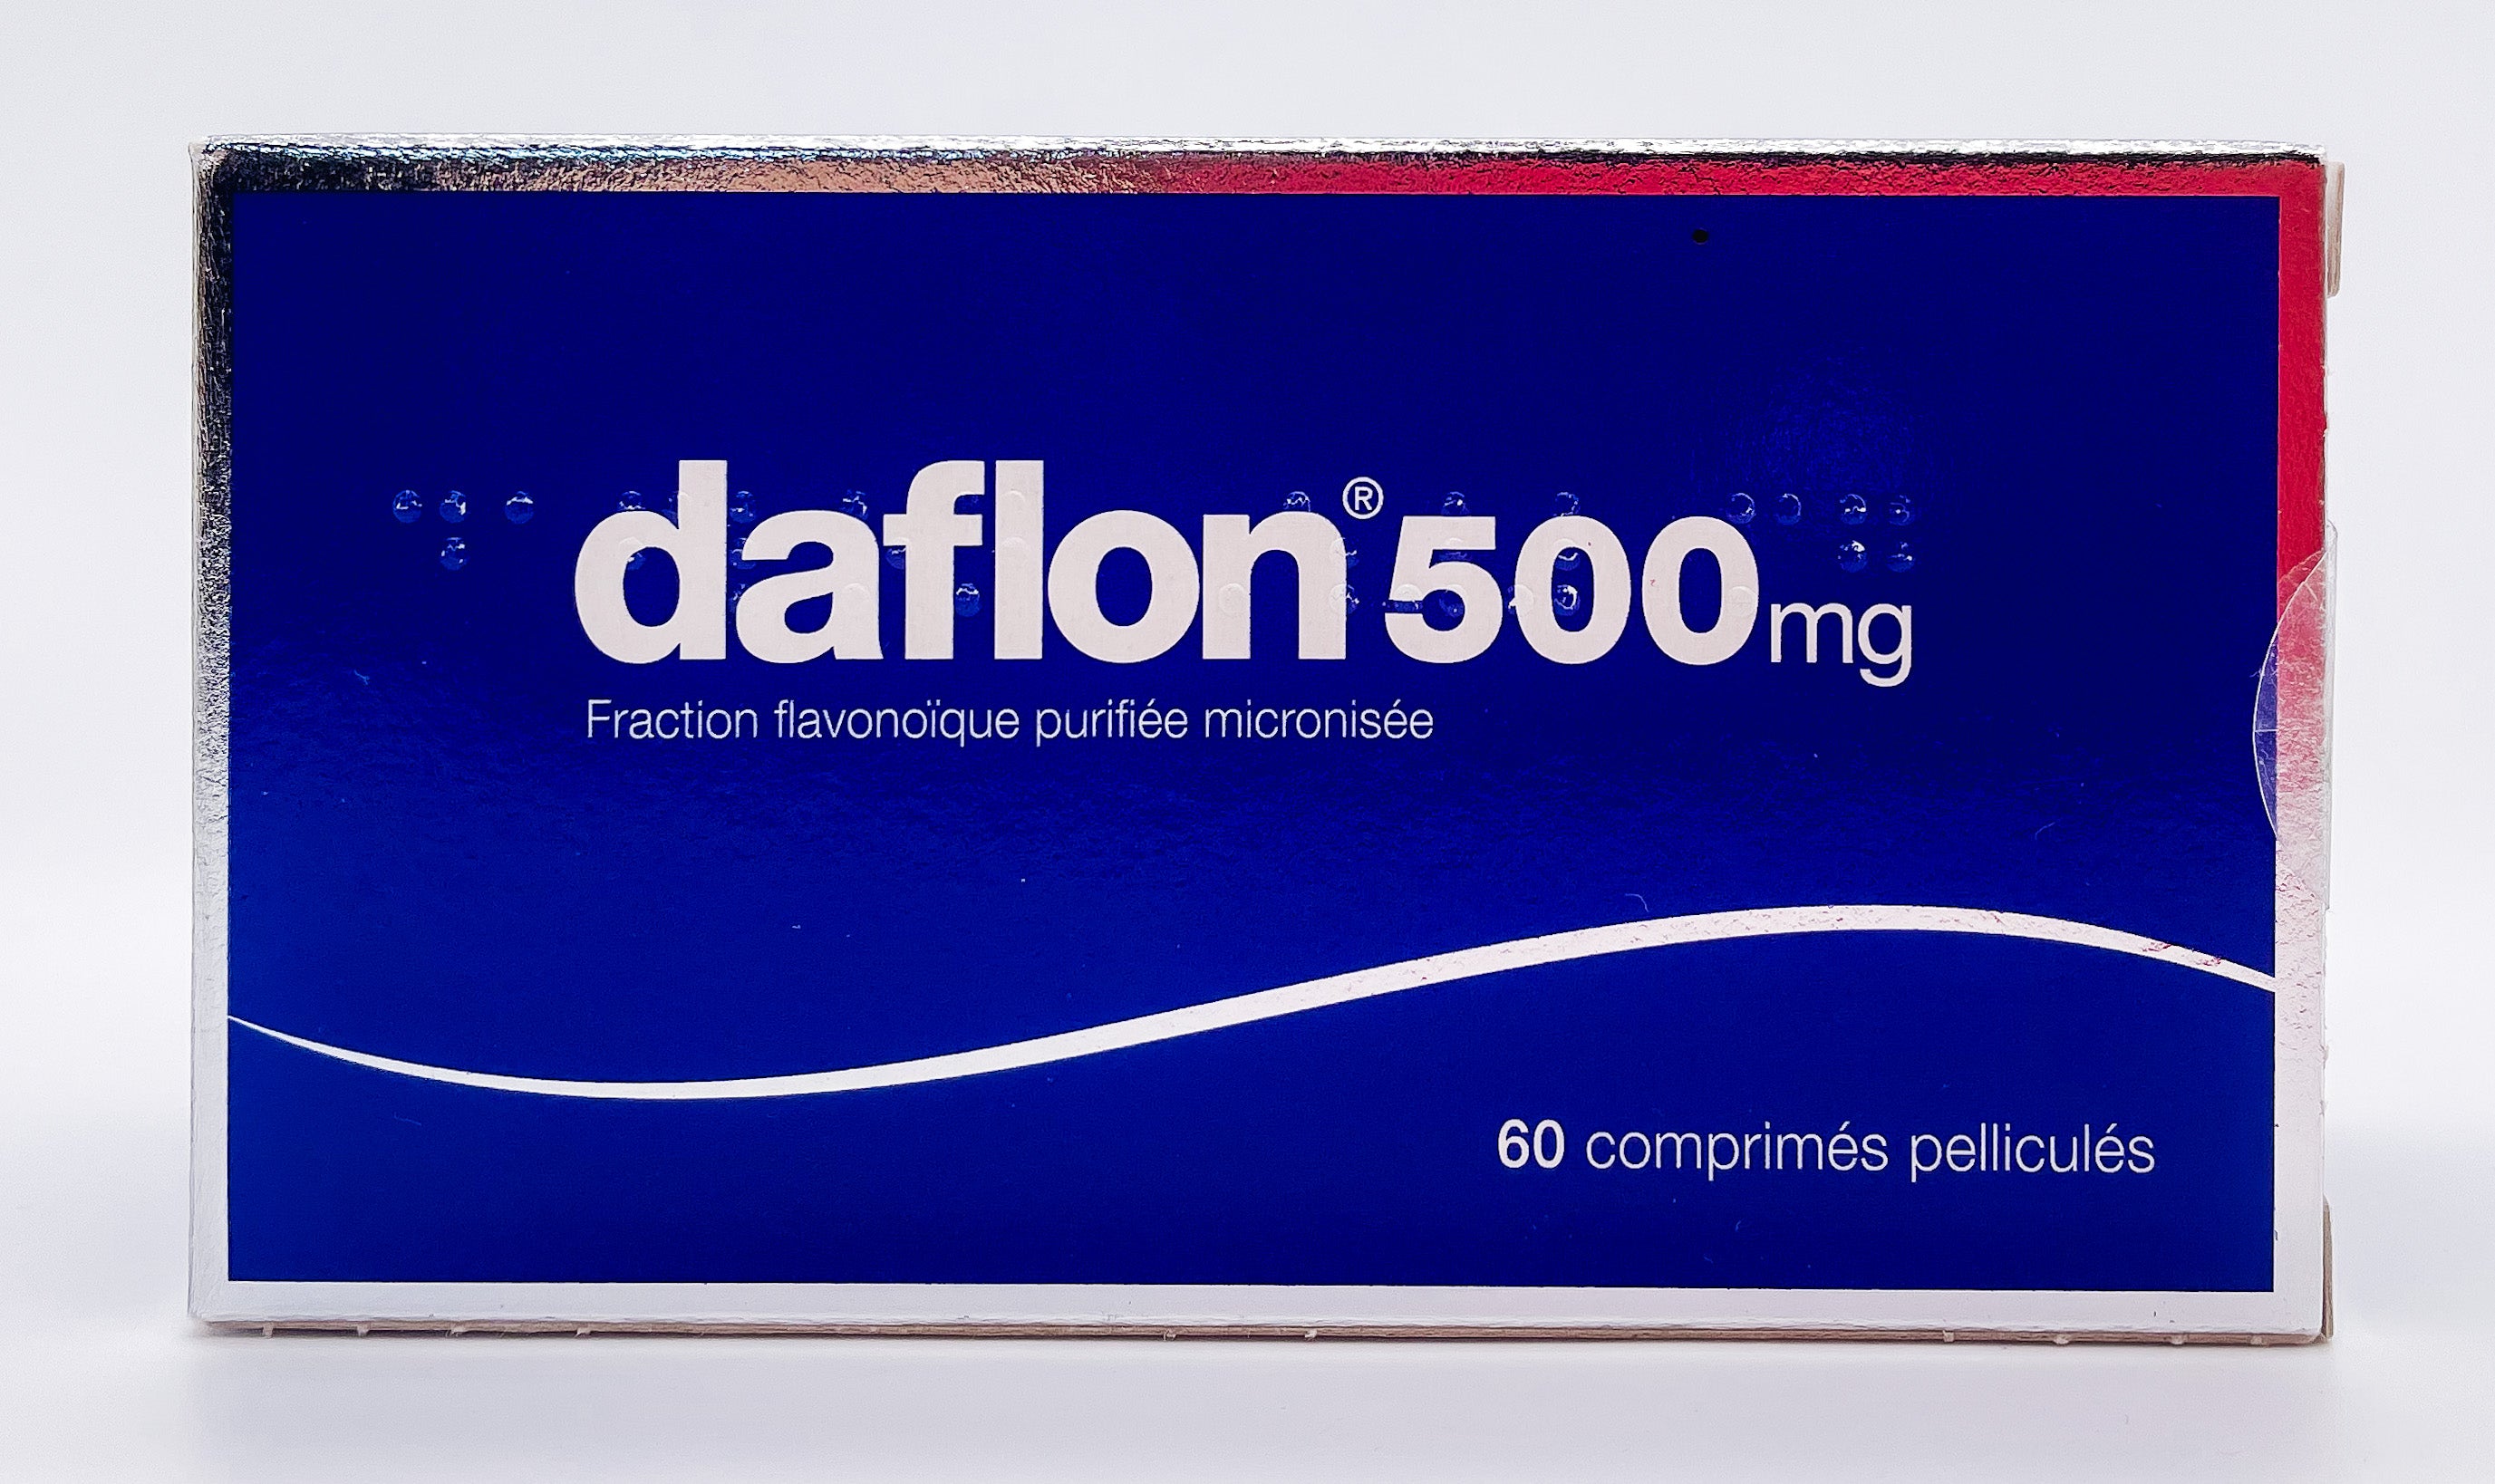 Daflon 1000 MG Tablet (10): Uses, Side Effects, Price & Dosage